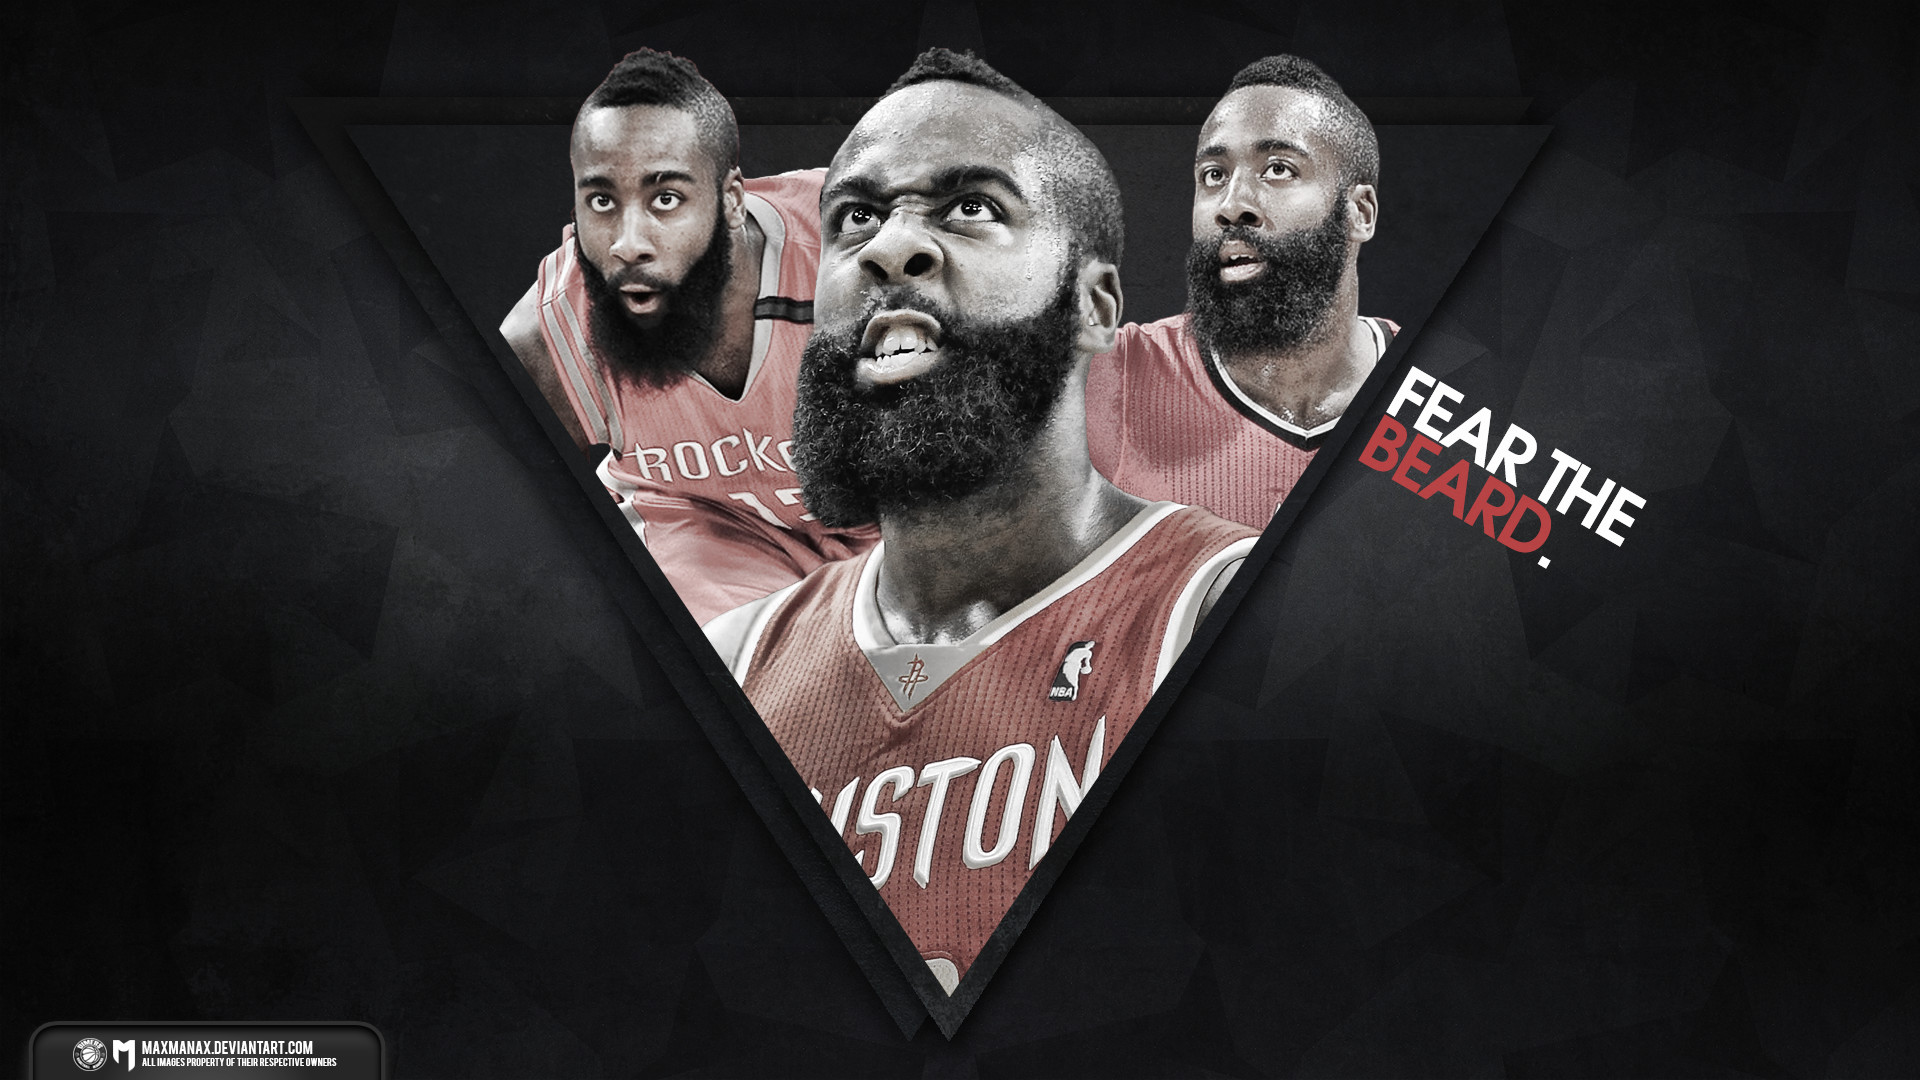 1920x1080 James Harden Contract Extension : James harden fear the beard poster